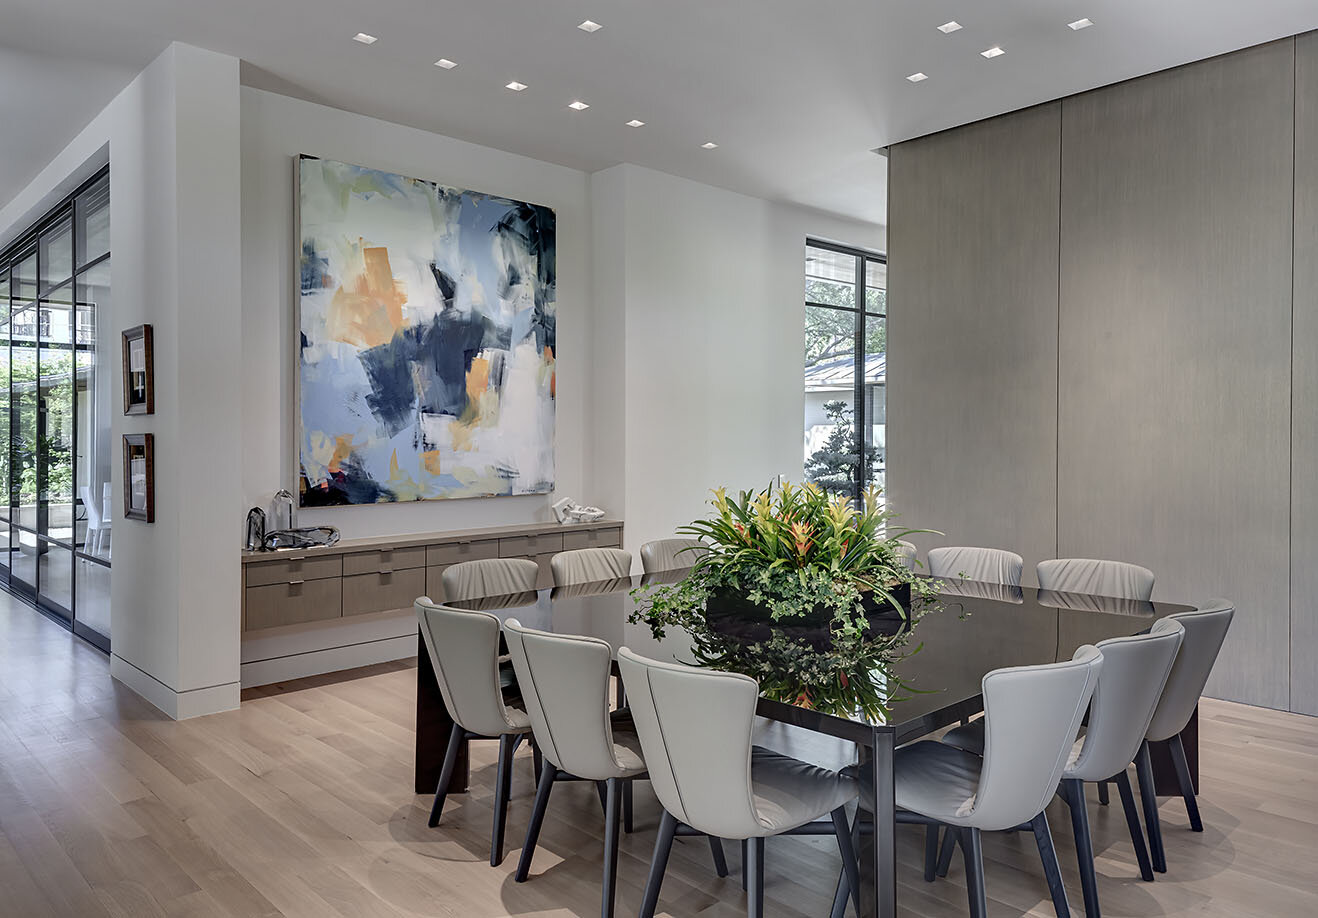  Modern comfortable contemporary home in Preston Hollow Dallas Texas featuring a large, open living space dining area 